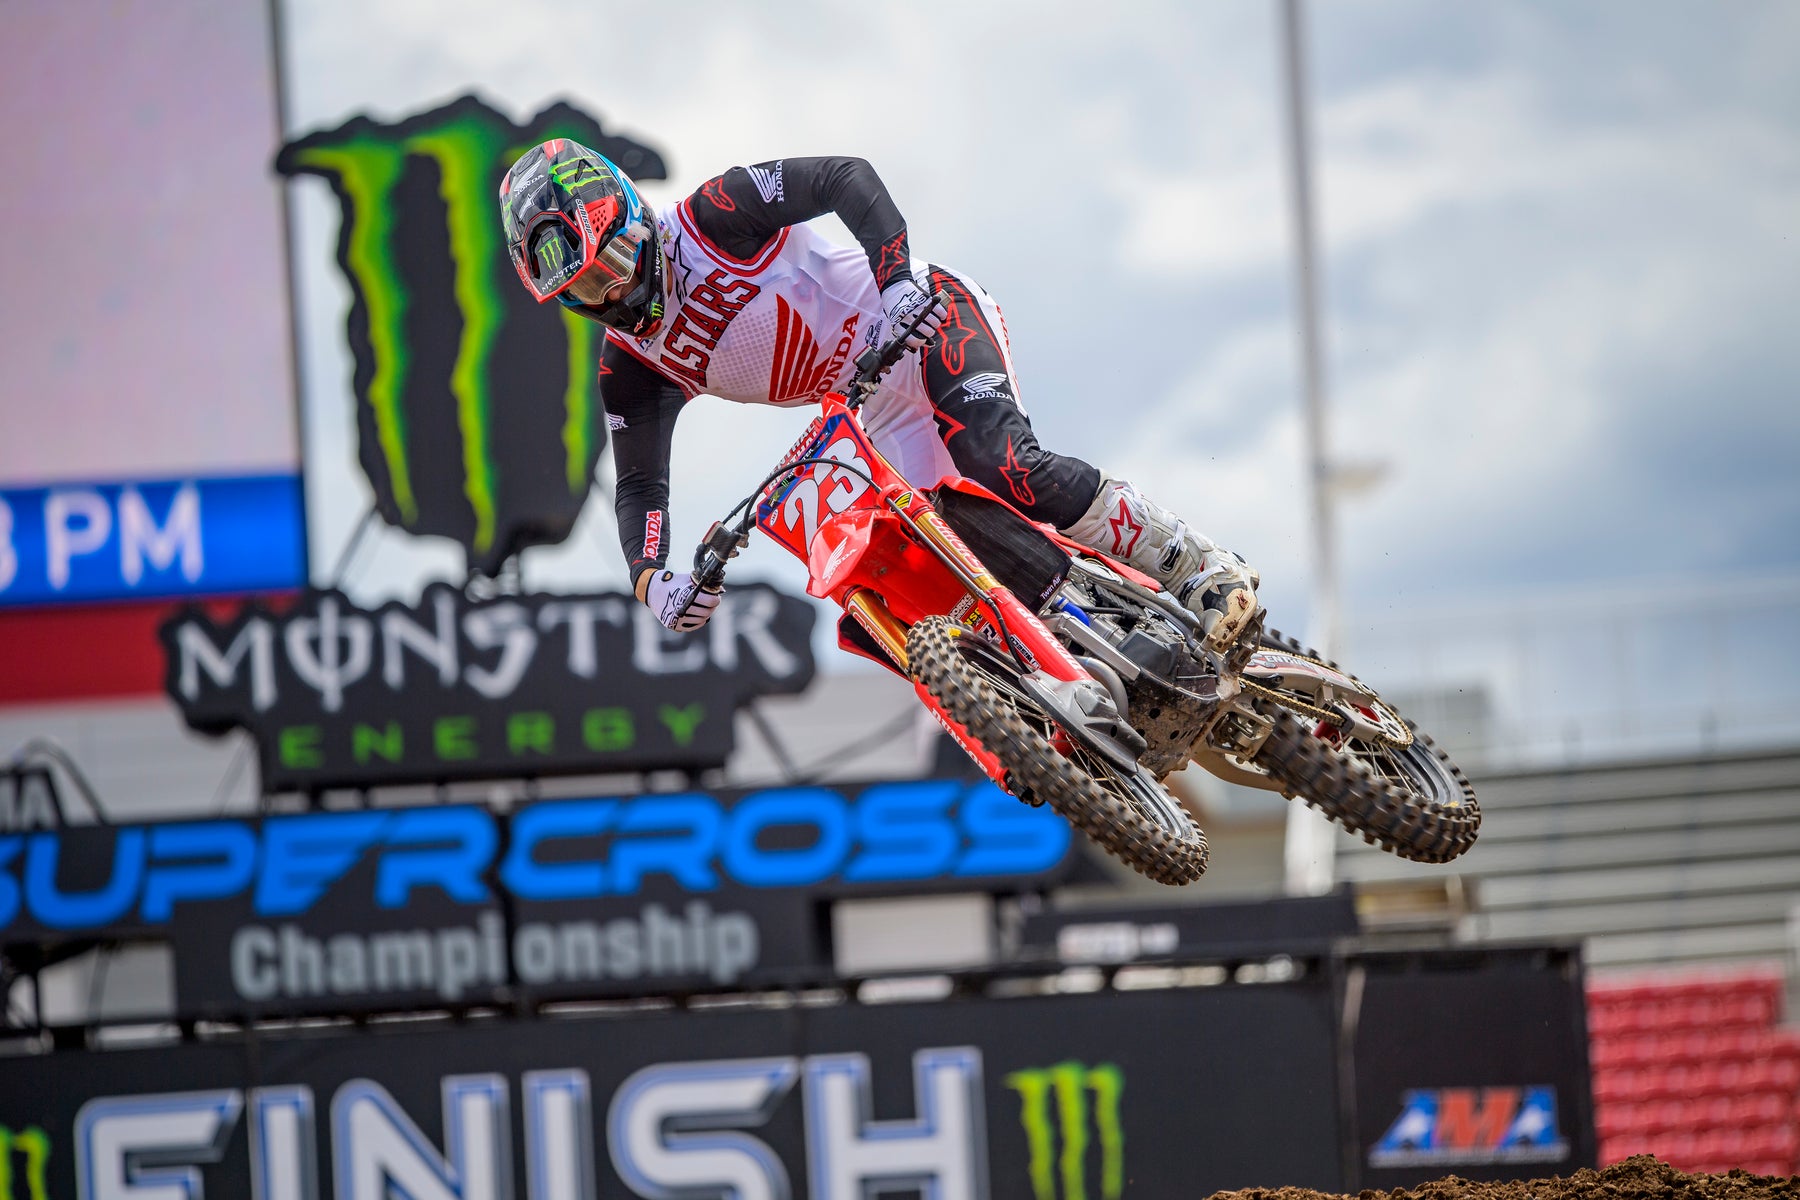 ALPINESTARS  PODIUM LOCK-OUT AS CHASE SEXTON RIDES TO DOMINANT 450SX VICTORY IN SALT LAKE CITY